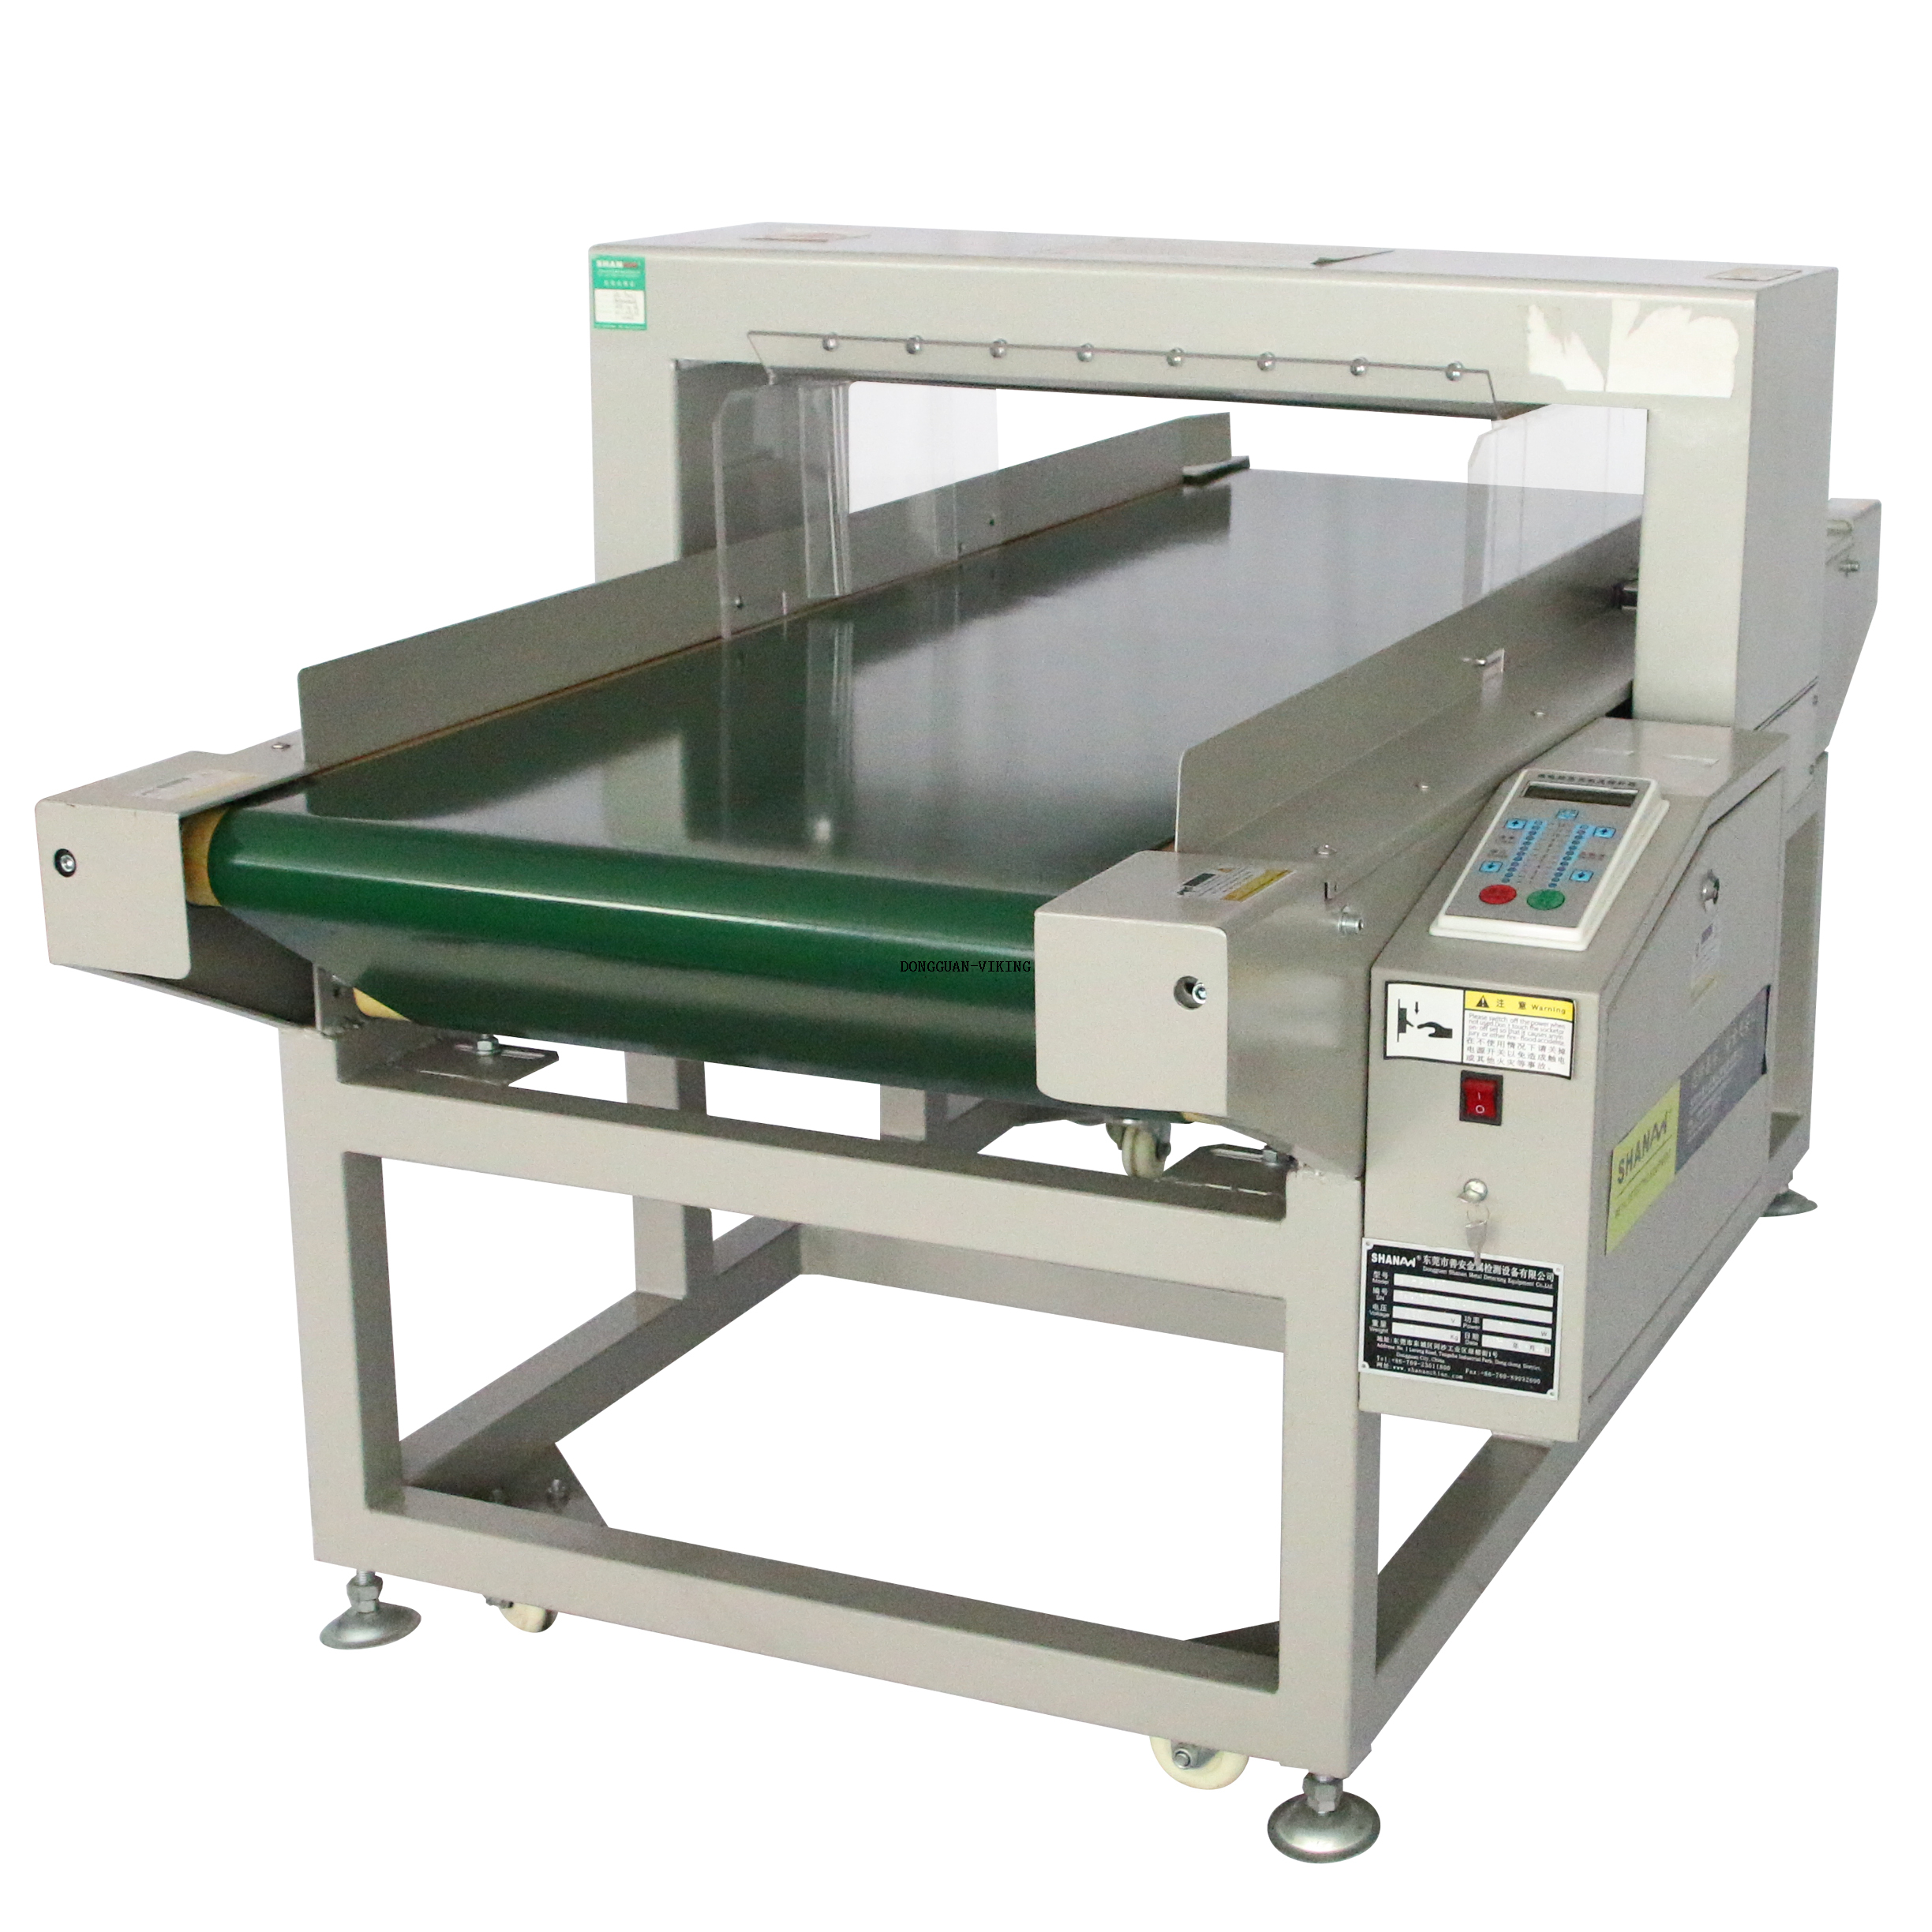 High Accuracy Needle Detector Machine Needle Broken Needle Metal Detector Widely Used In Textile Industry